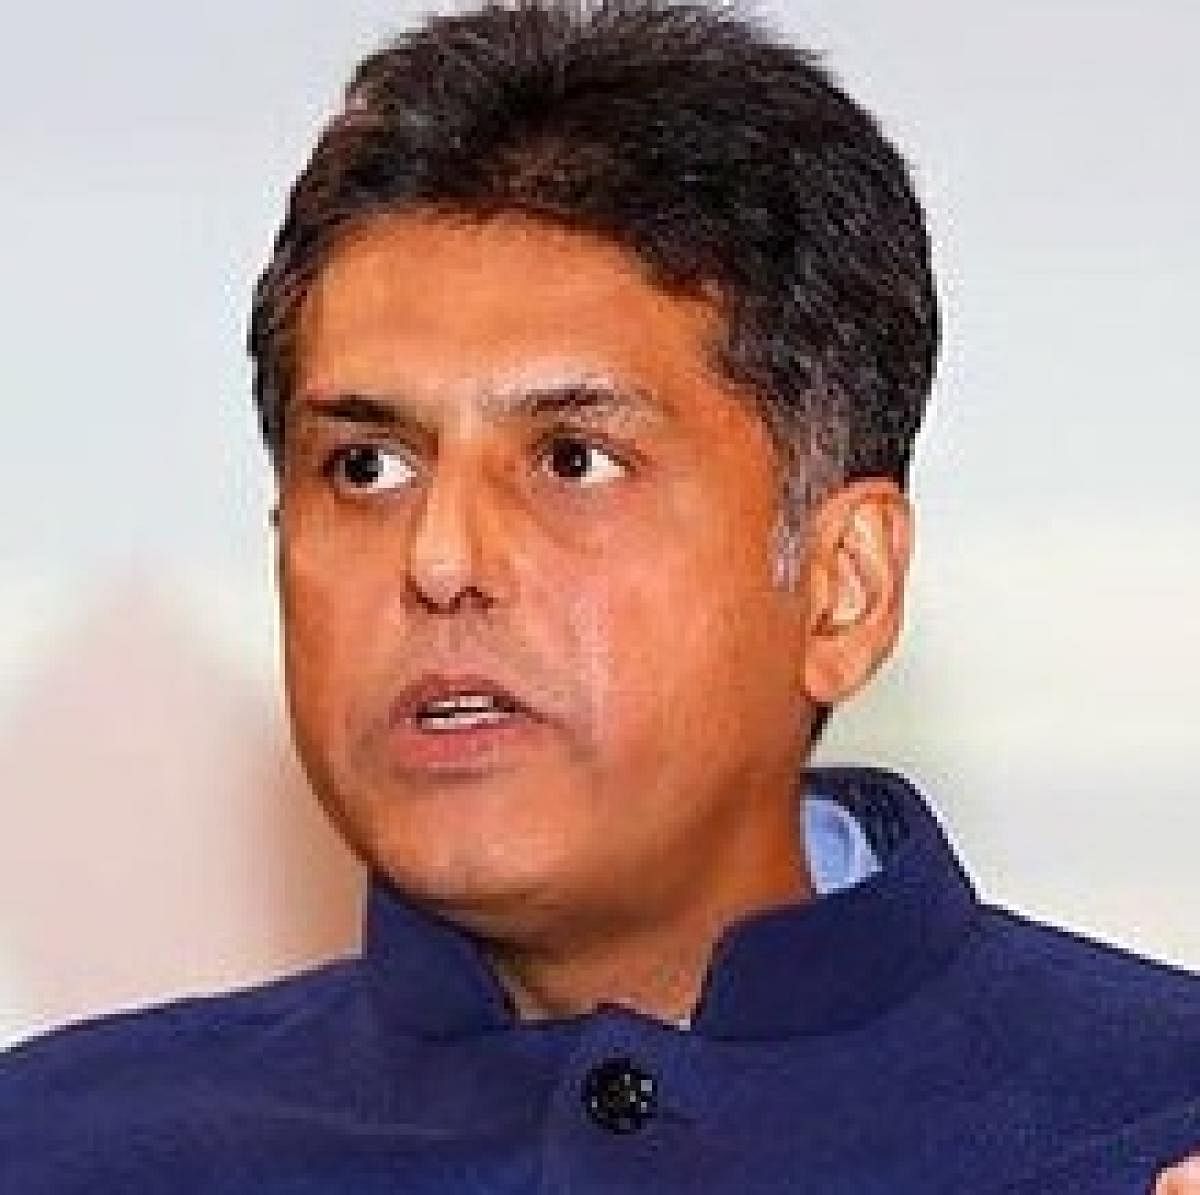 Tewari, who is the Congress candidate from Anandpur Sahib, said the Lok Sabha elections are a "referendum" on the "non-performance" of the NDA government at the Centre. File photo